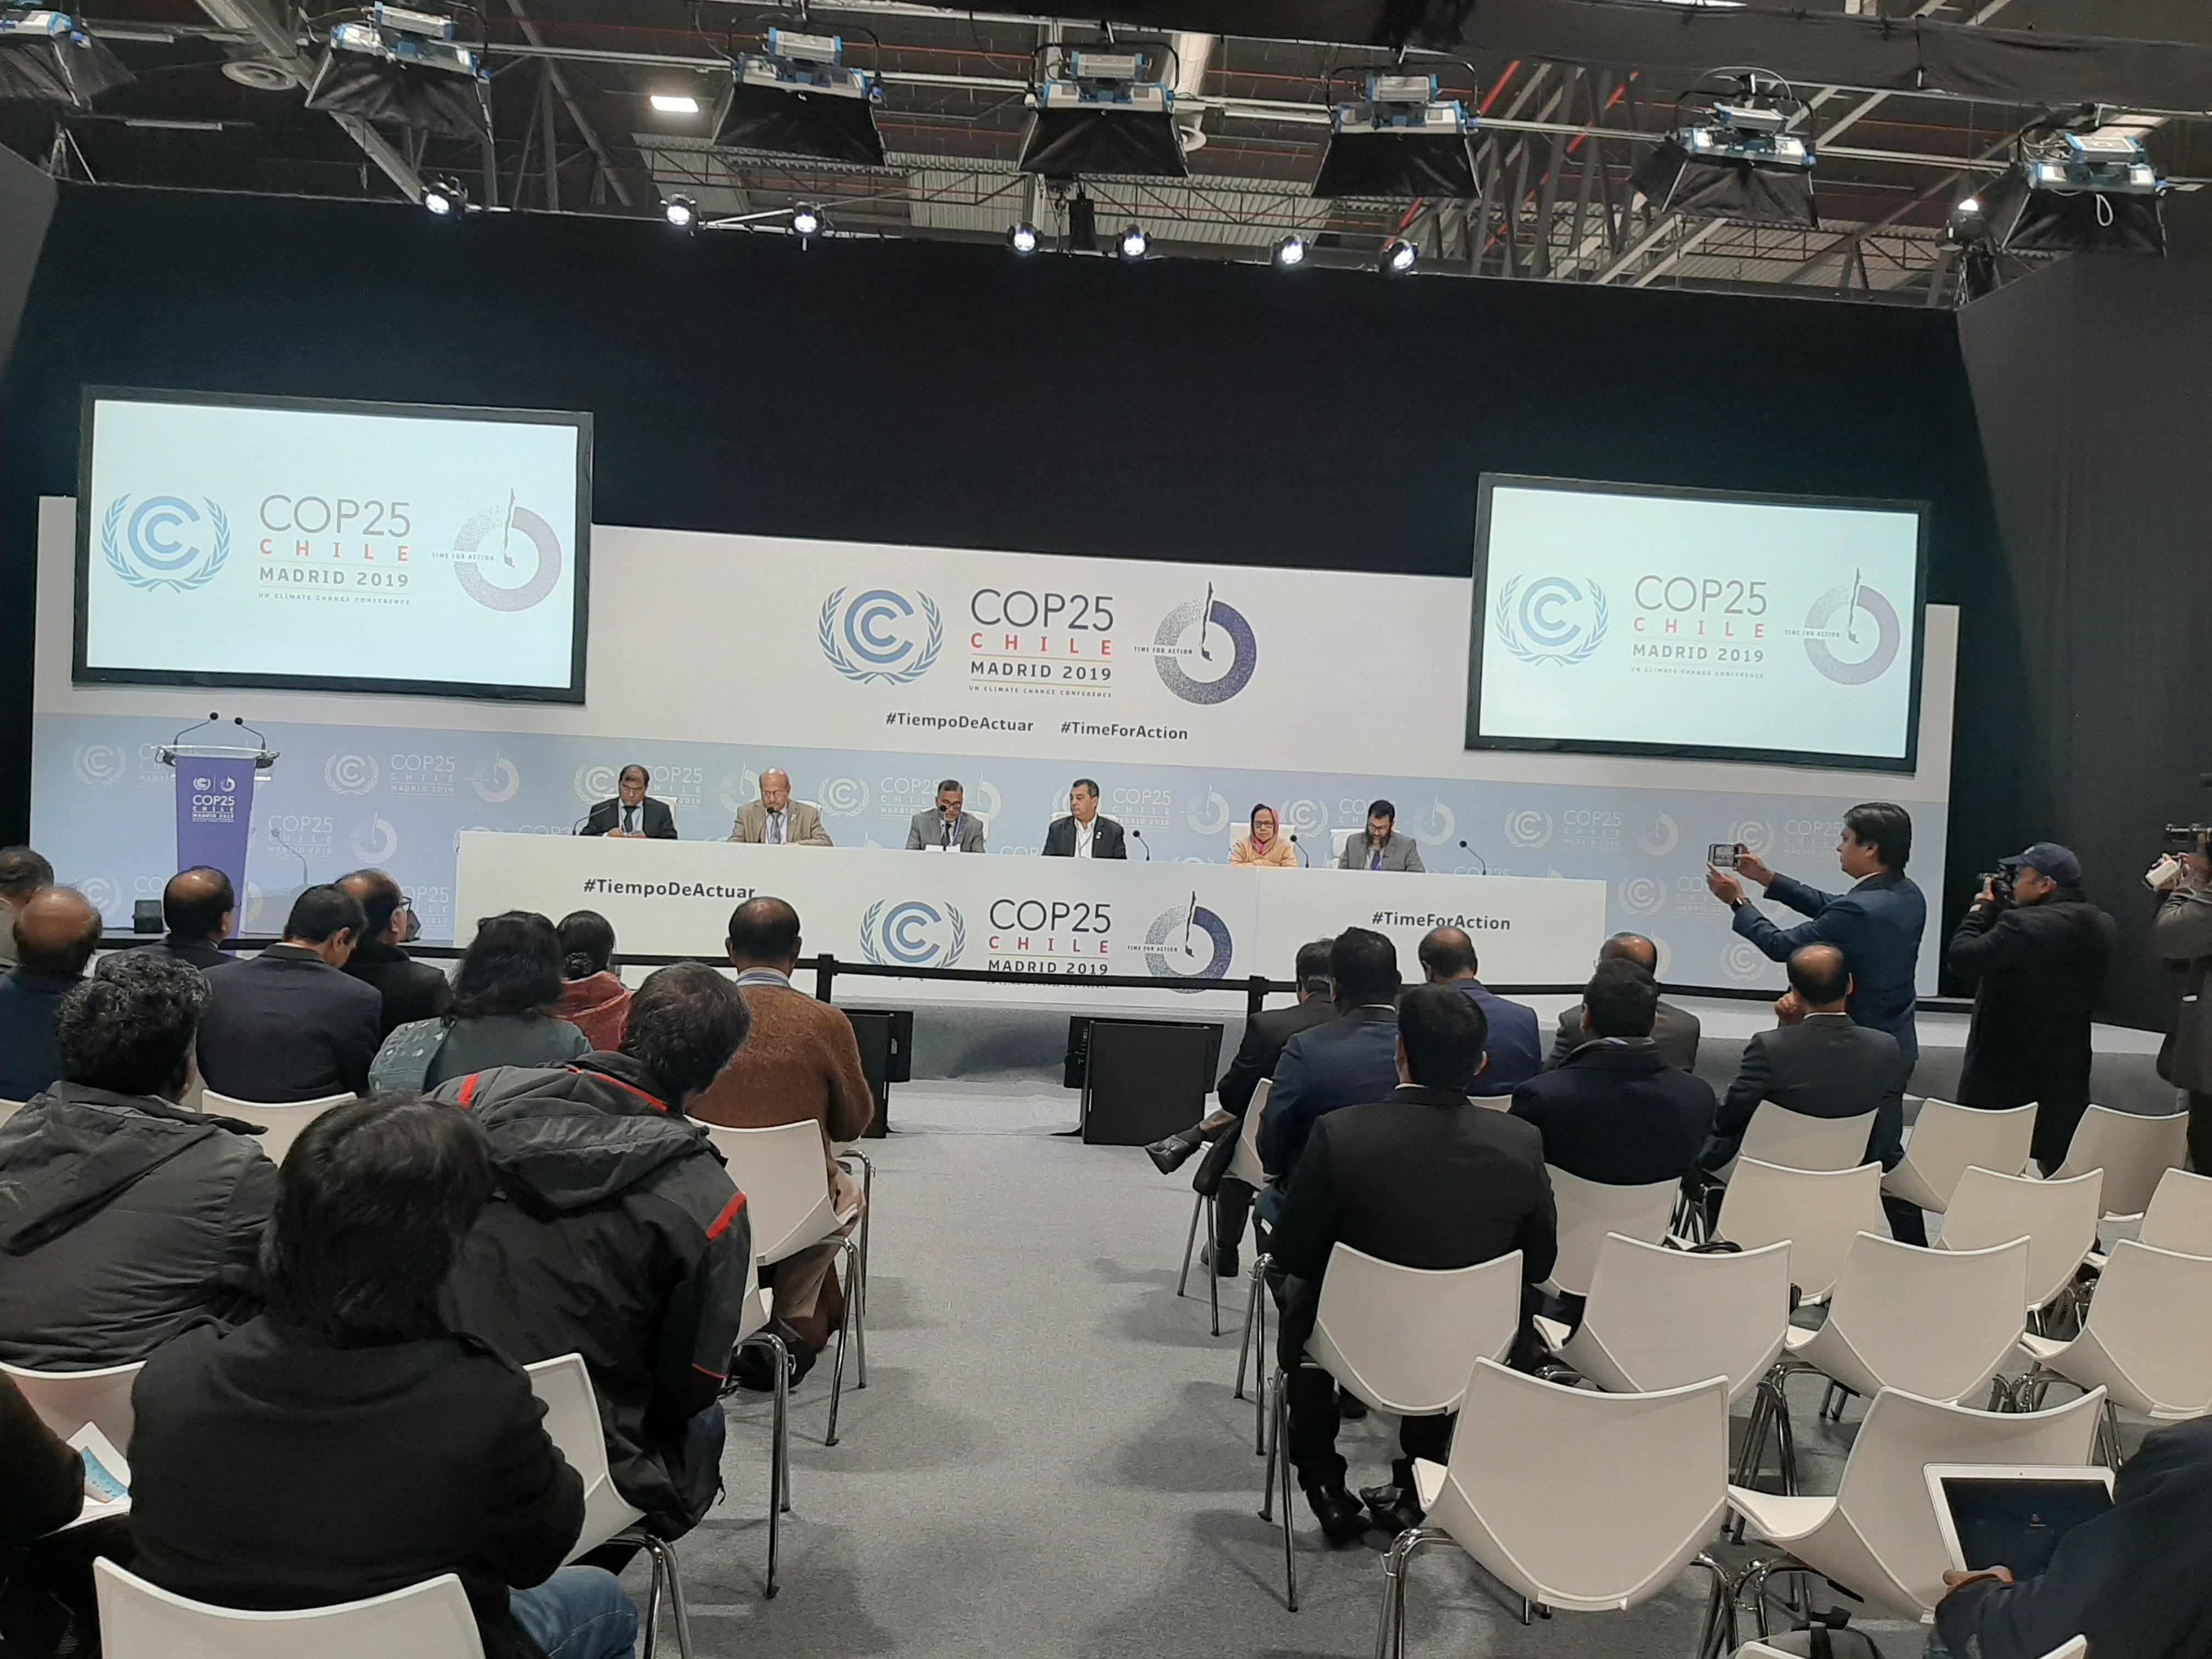 Bangladesh frustrated over the talks in COP25, as per the Press Conference